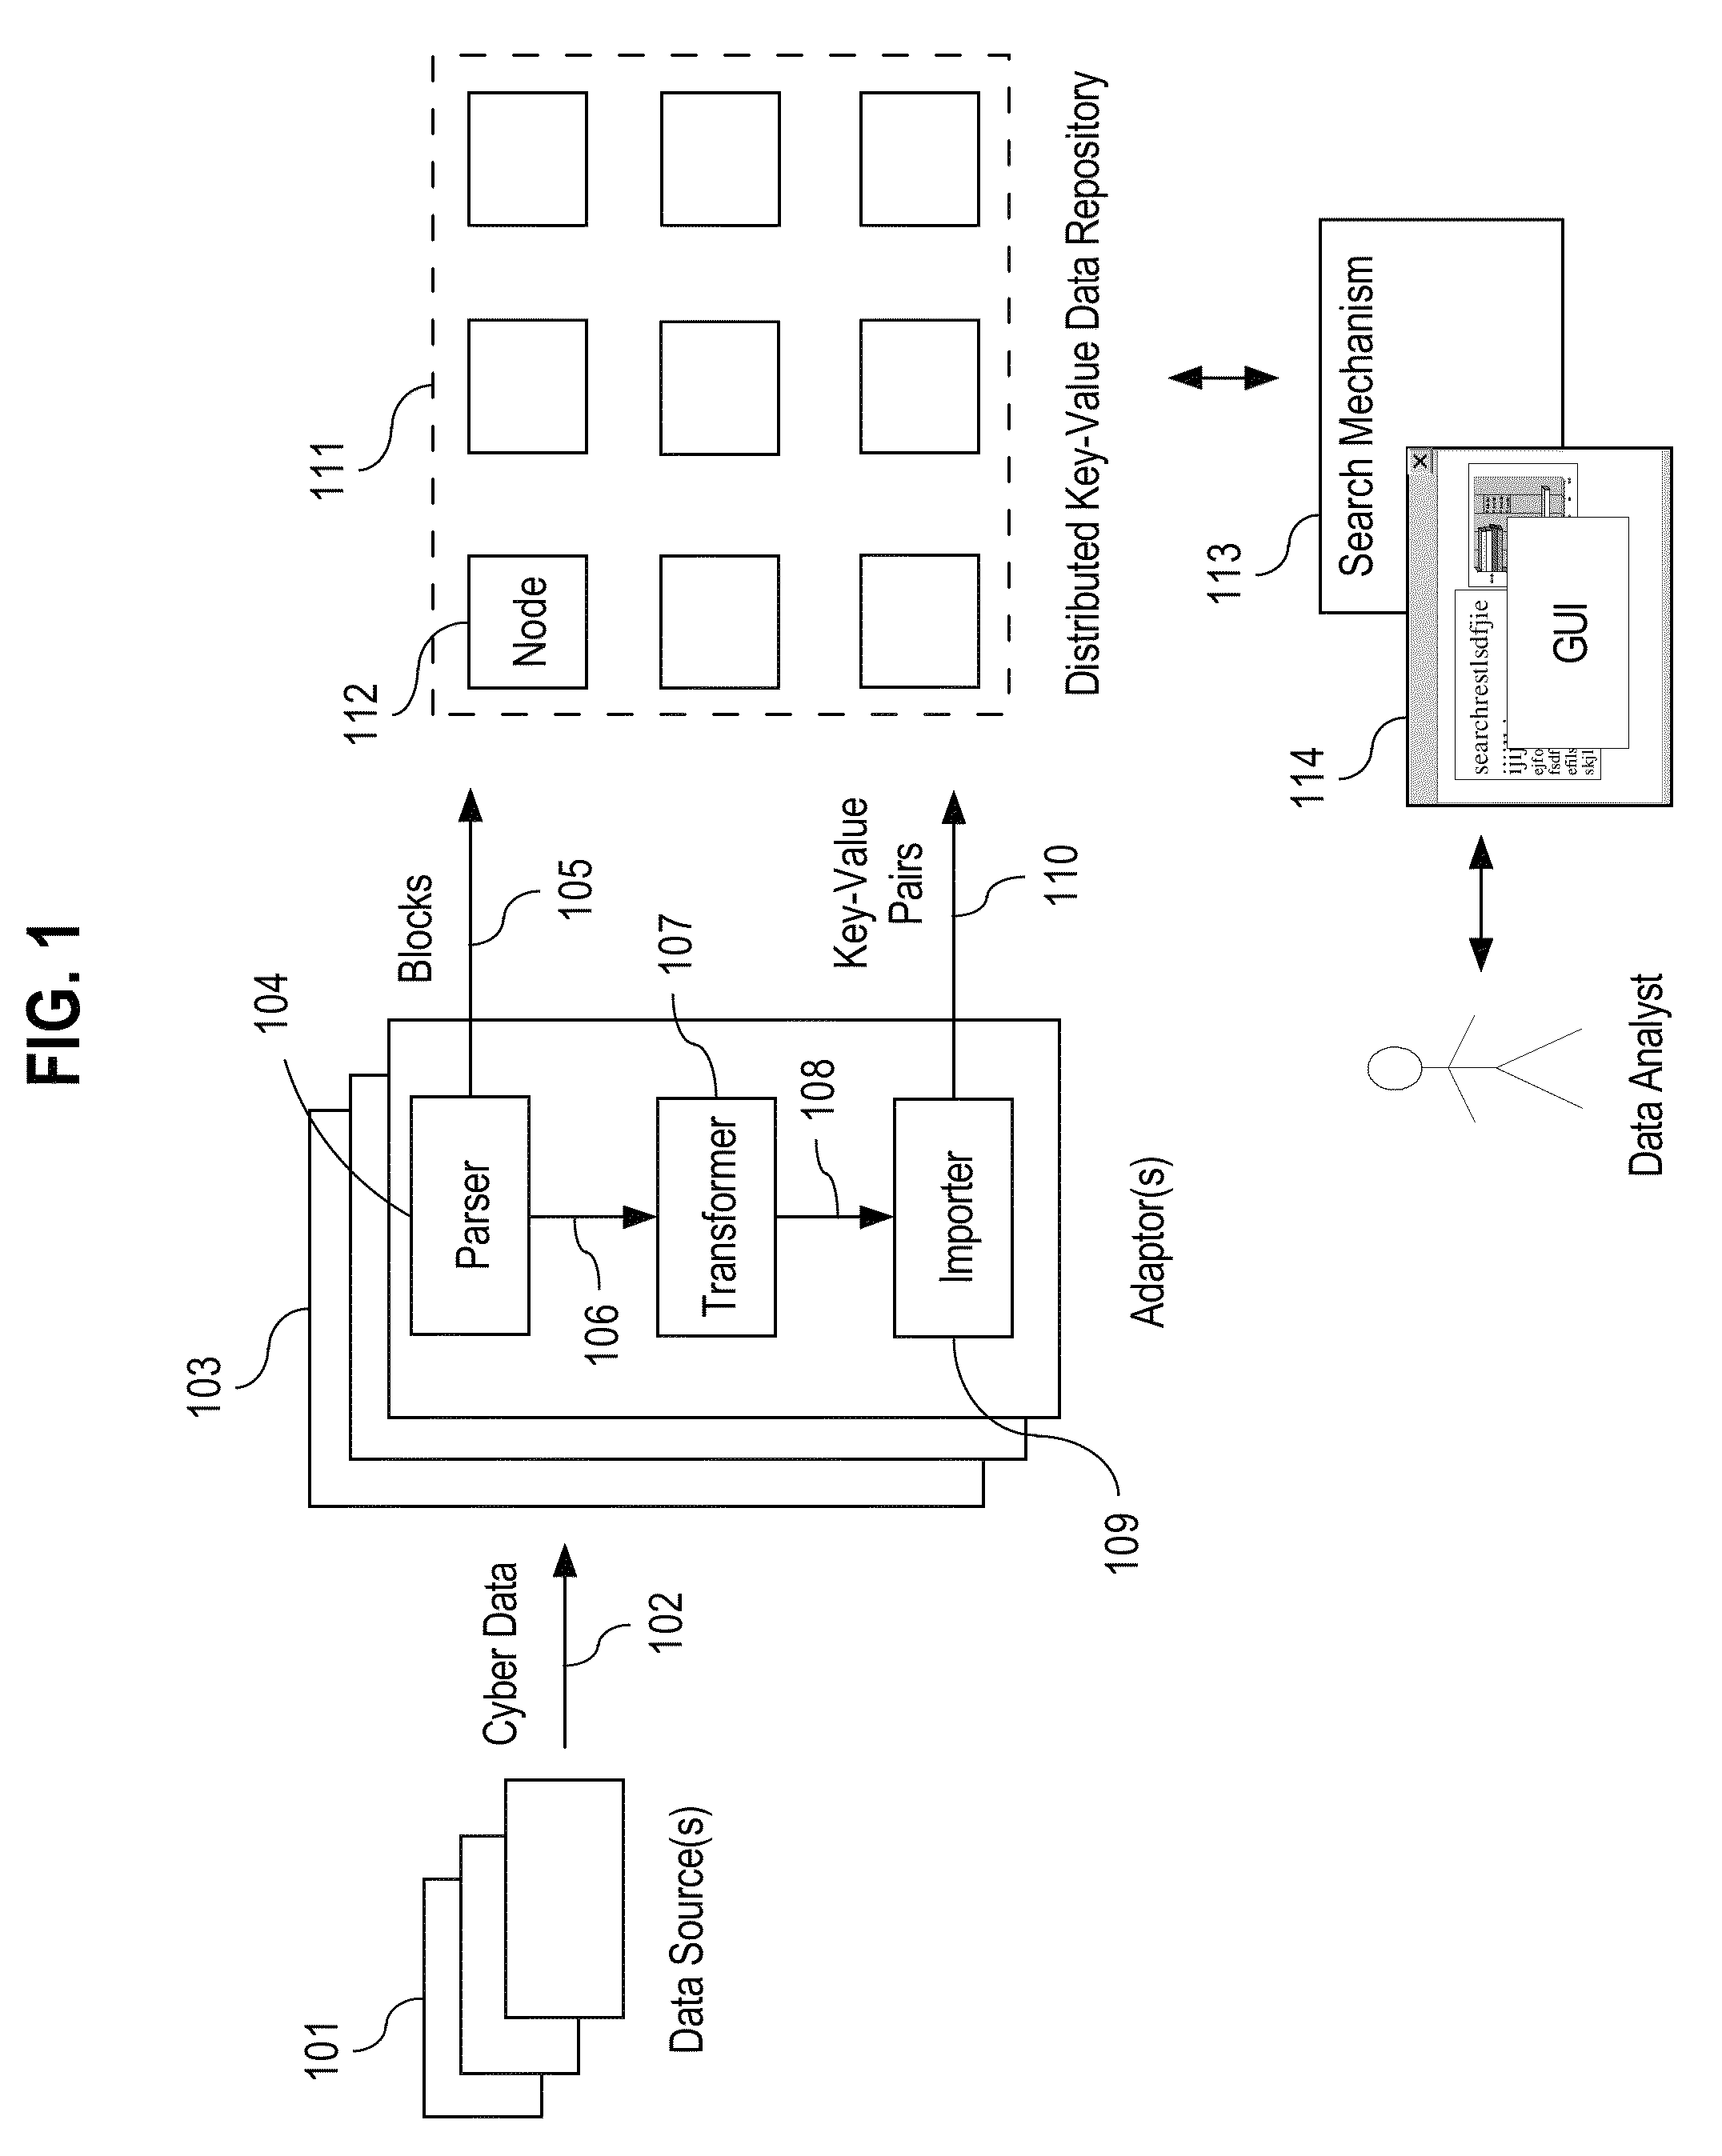 System and method for investigating large amounts of data